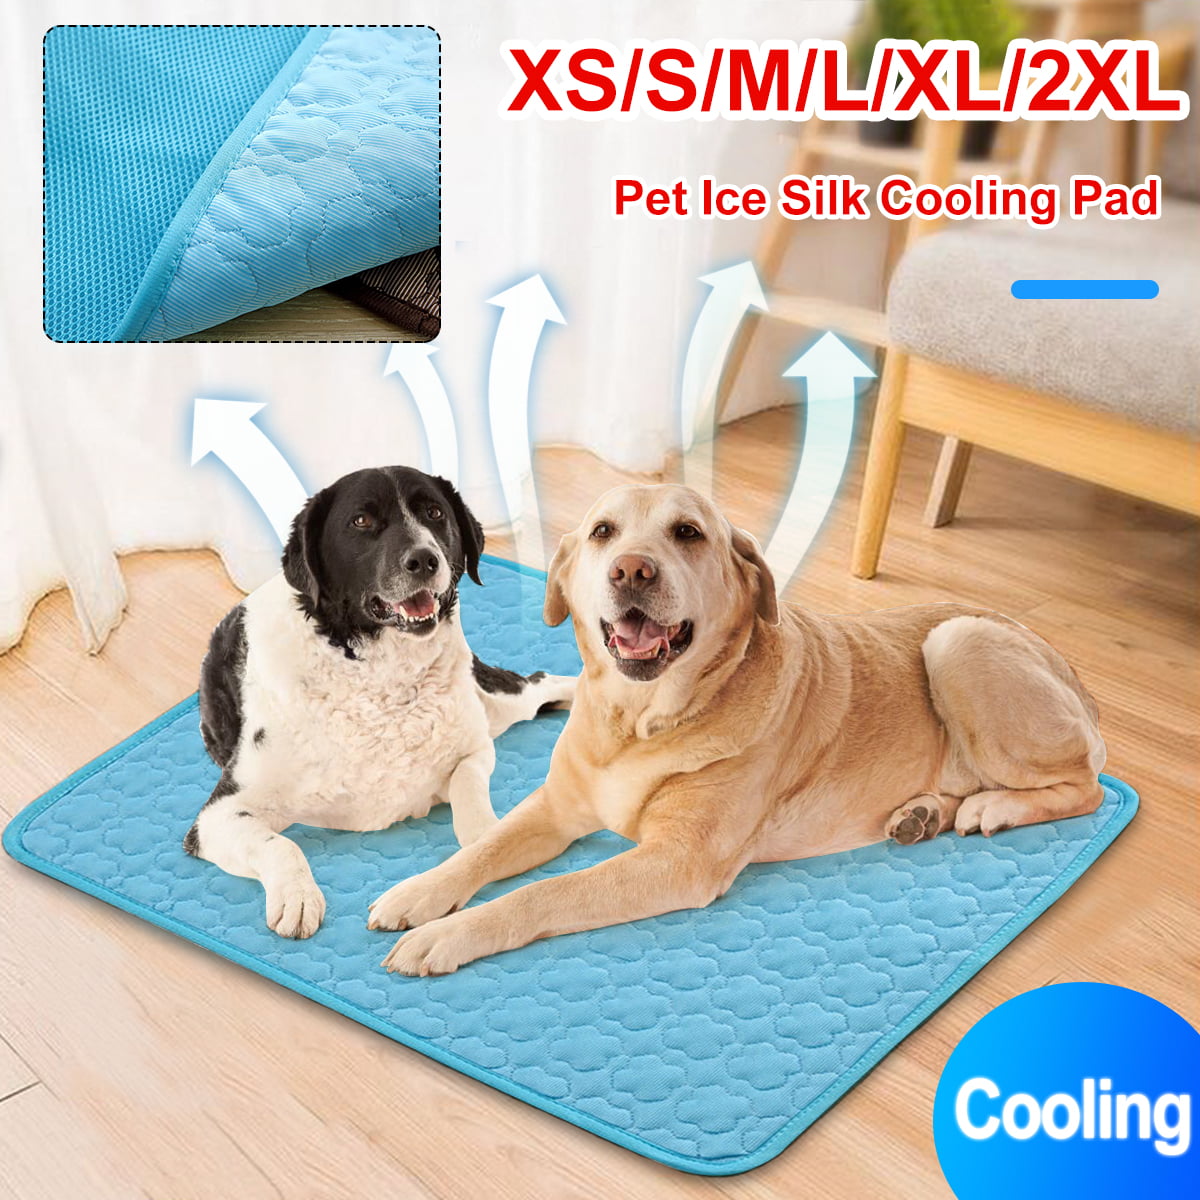 New Pet Cooling Pad Gel Mat Cooler For Dog Crate Bed Kennel S M L XL Blue Home